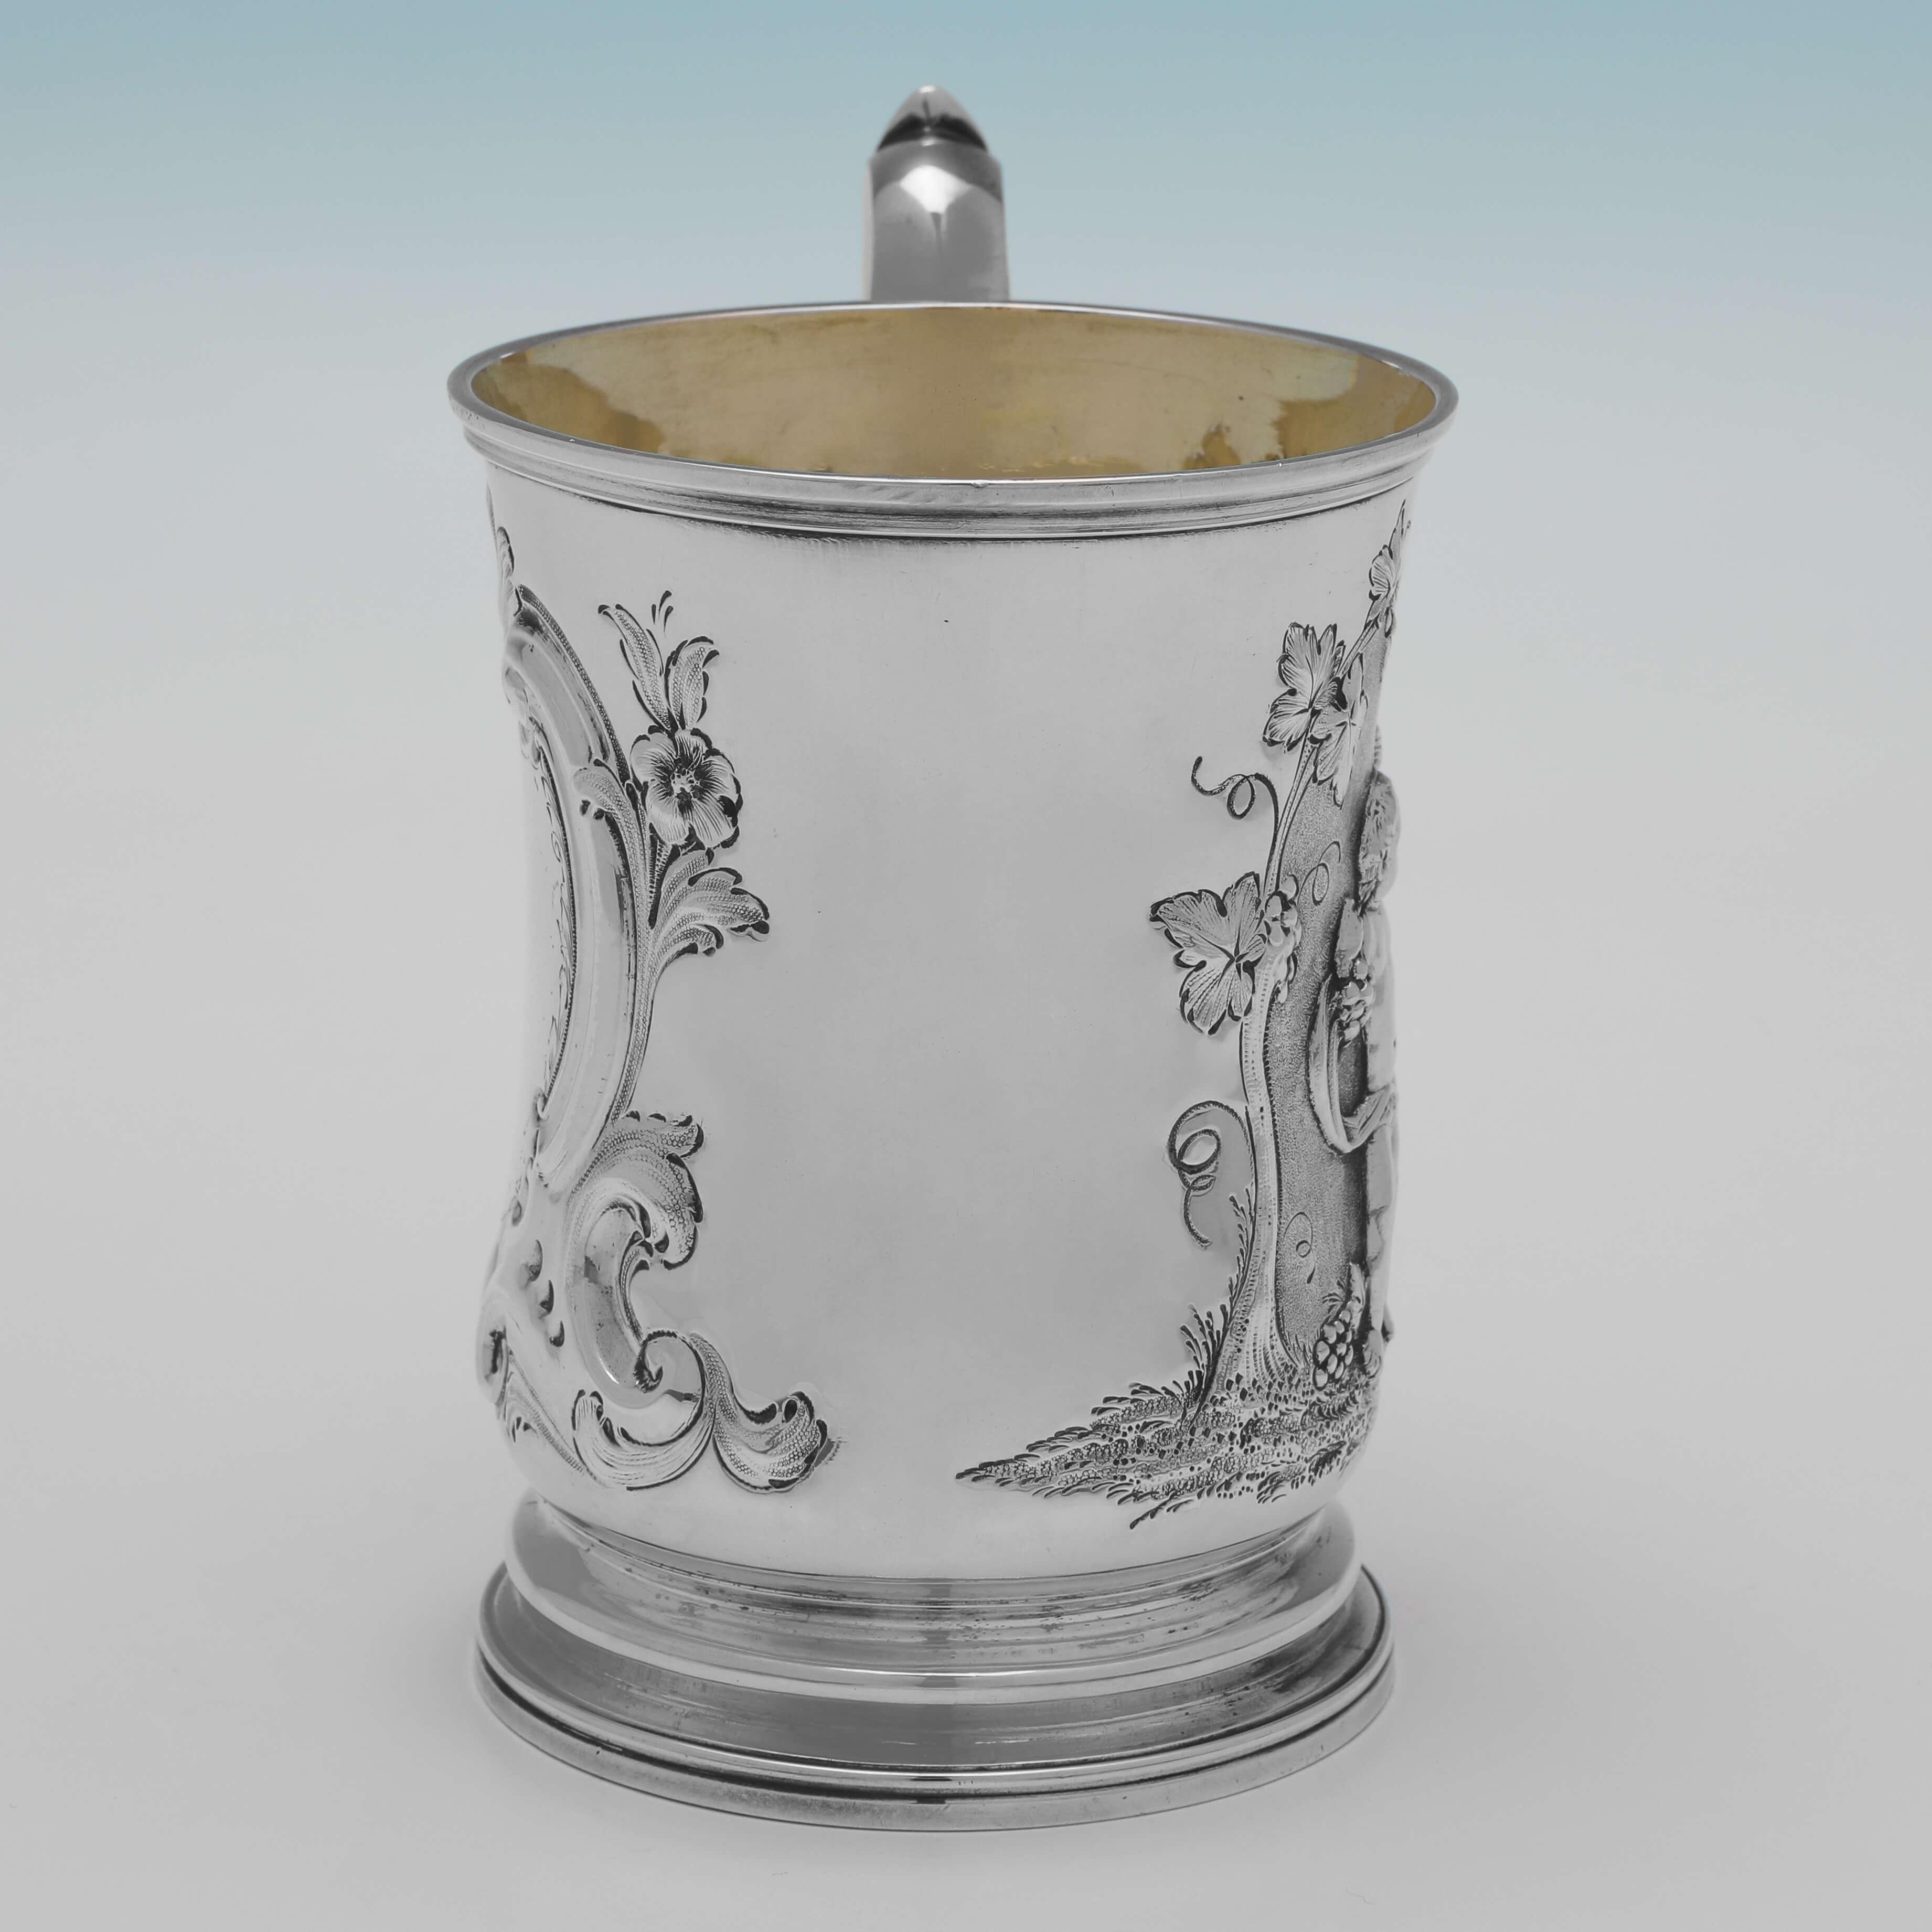 Hallmarked in London in 1856 by Barnards, this charming, Victorian, antique sterling silver christening mug, features a gilt interior and chased decoration to the body, with a scene depicting 2 putti drinking wine. 

The christening mug measures